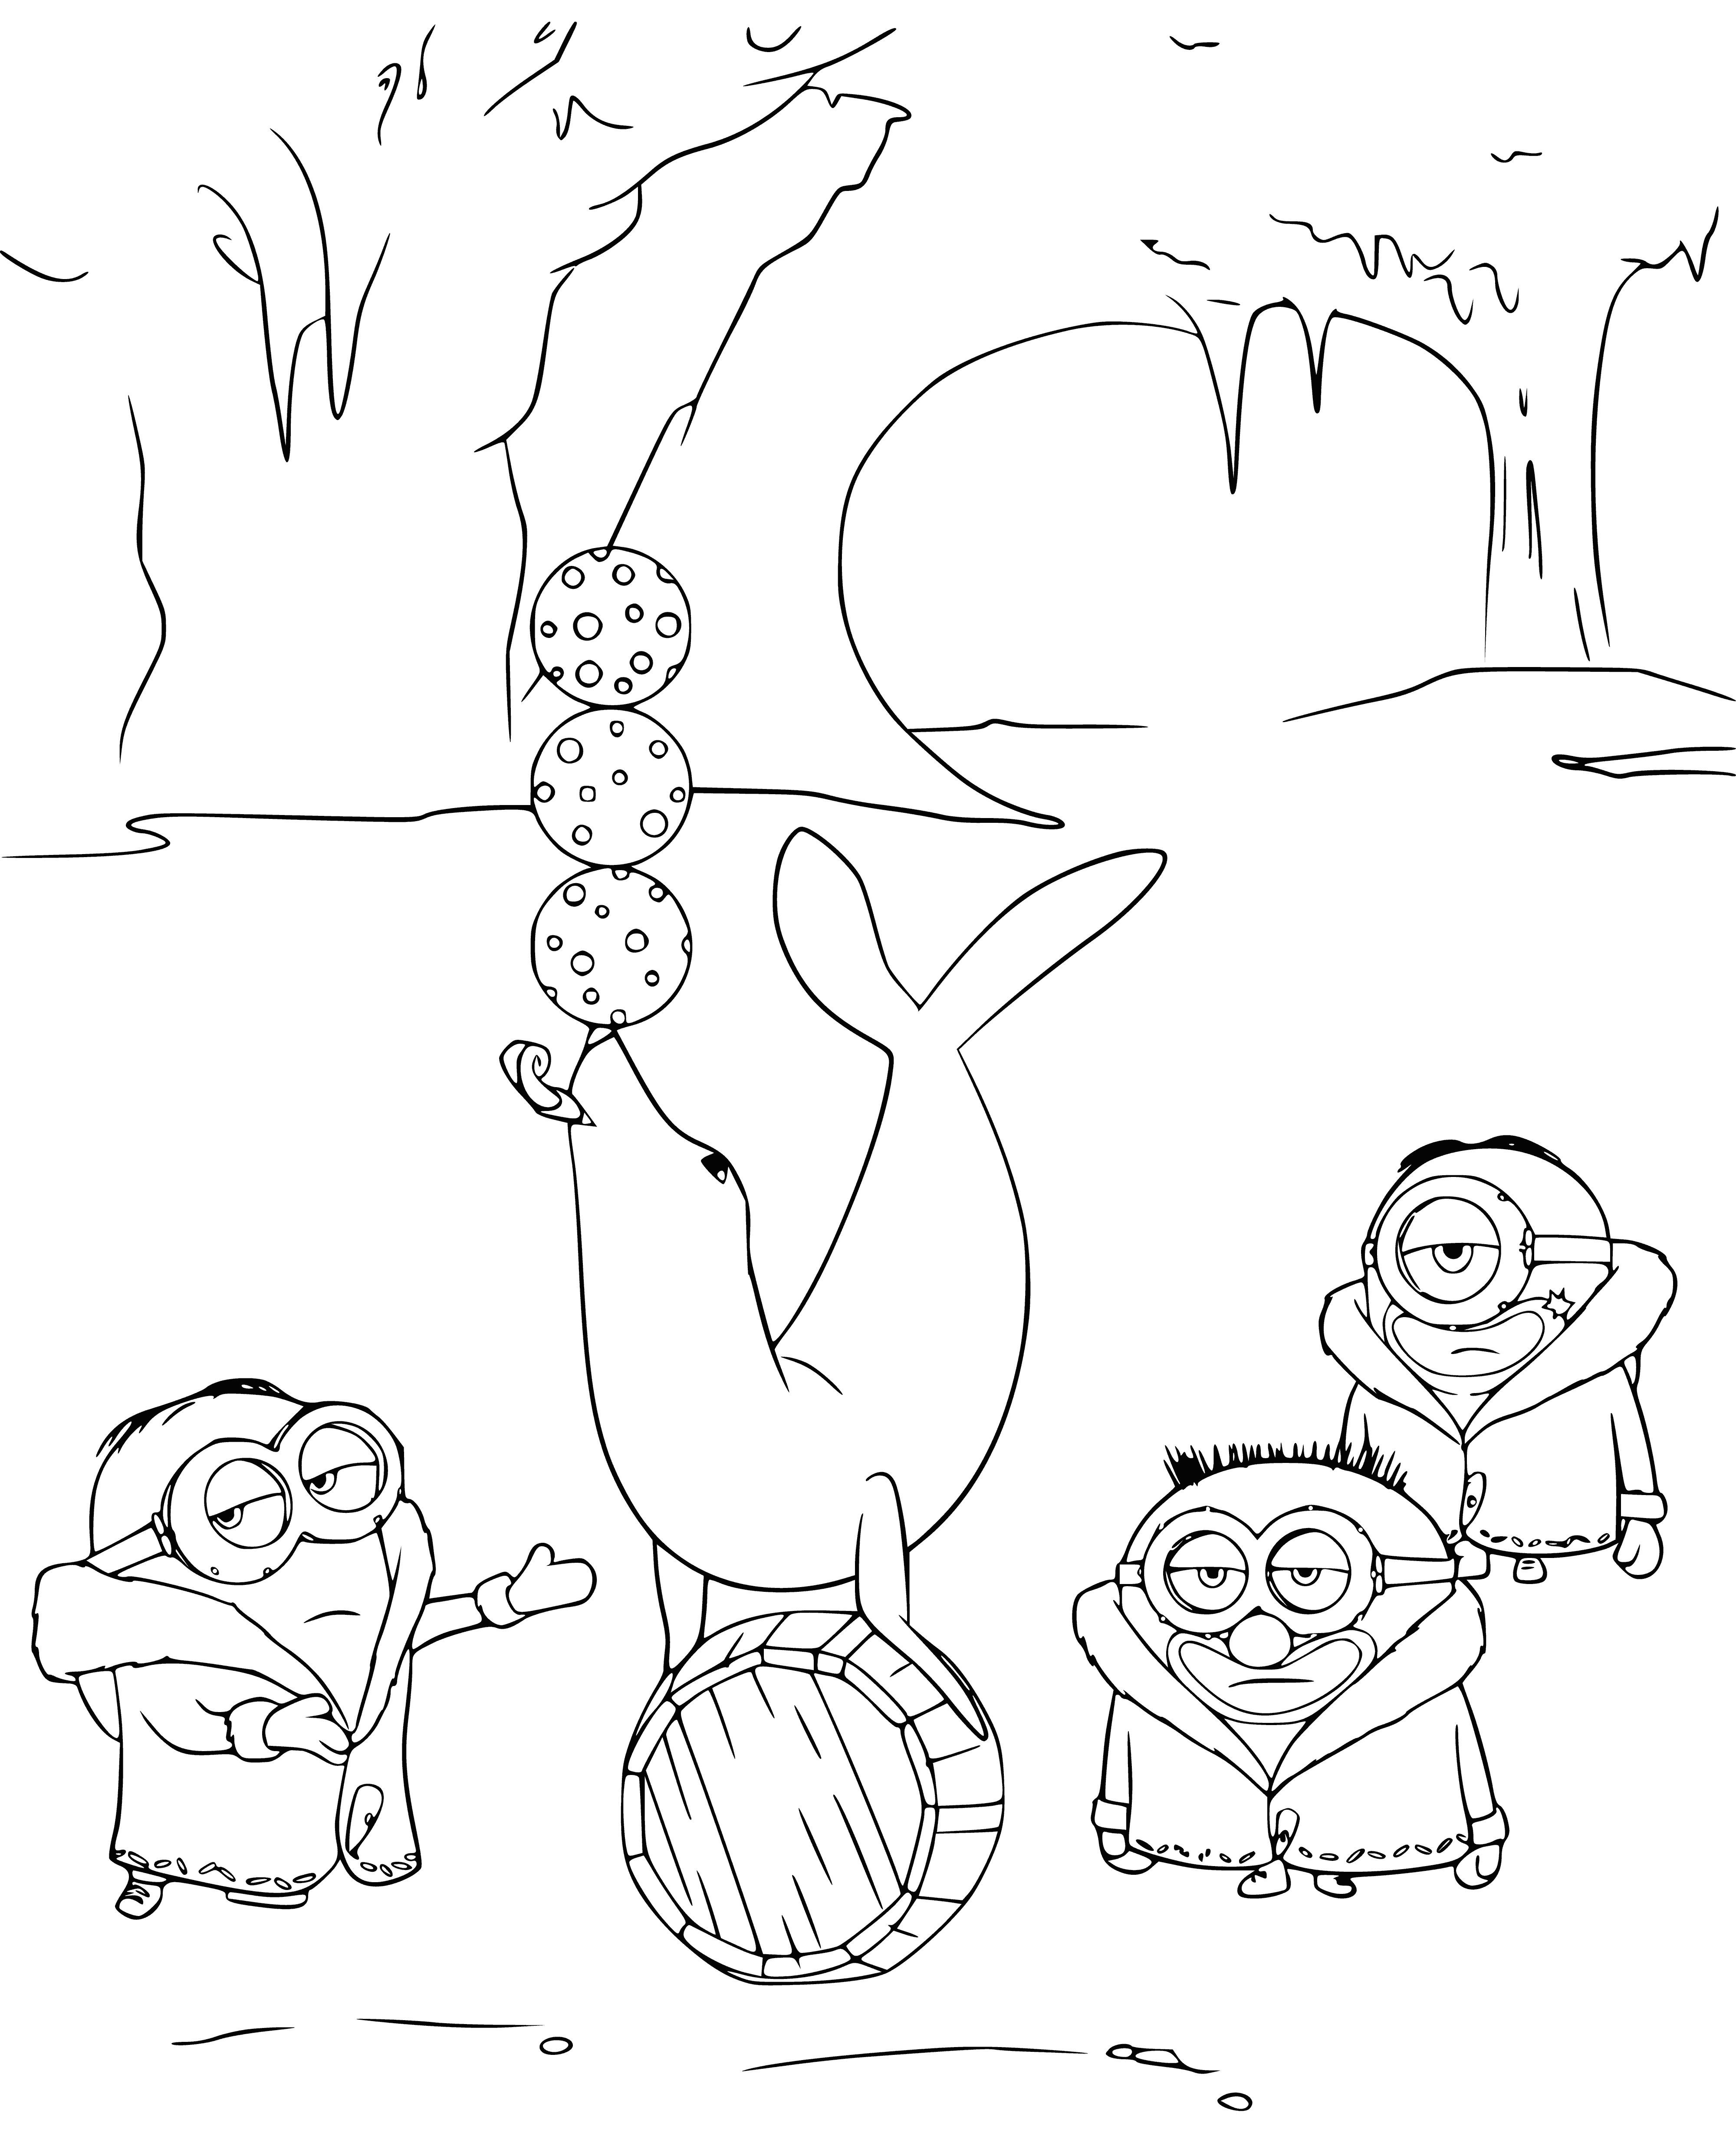 Minions at the North Pole coloring page